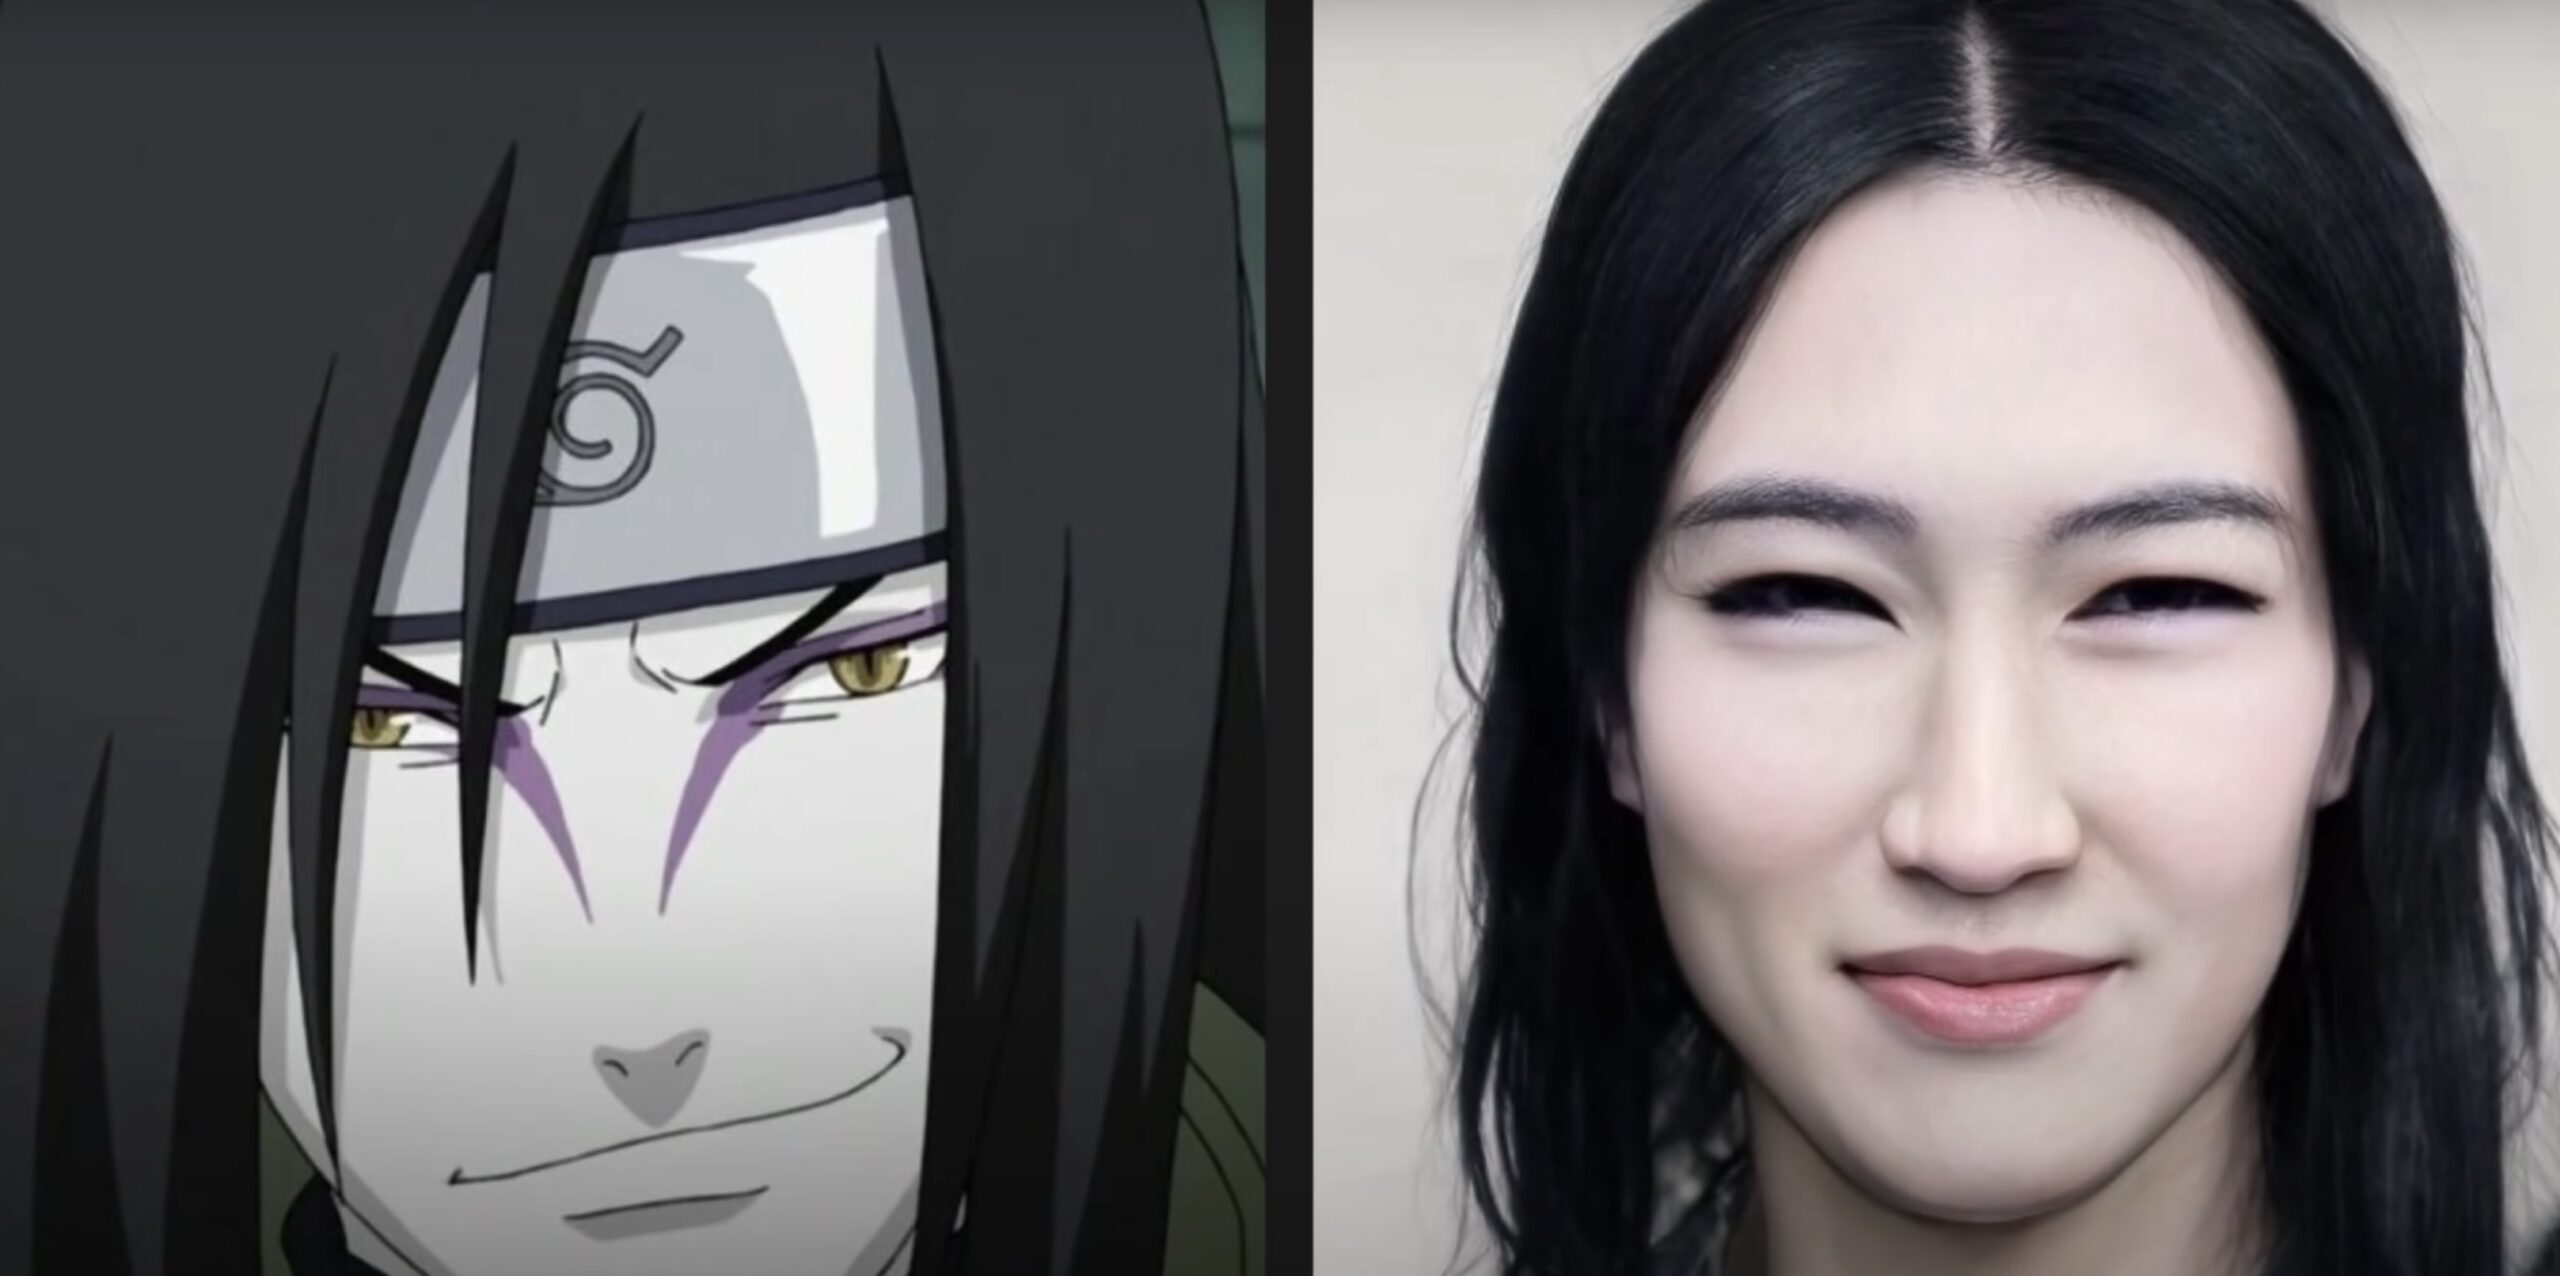 20 Naruto Characters & How They Would Look In Real Life